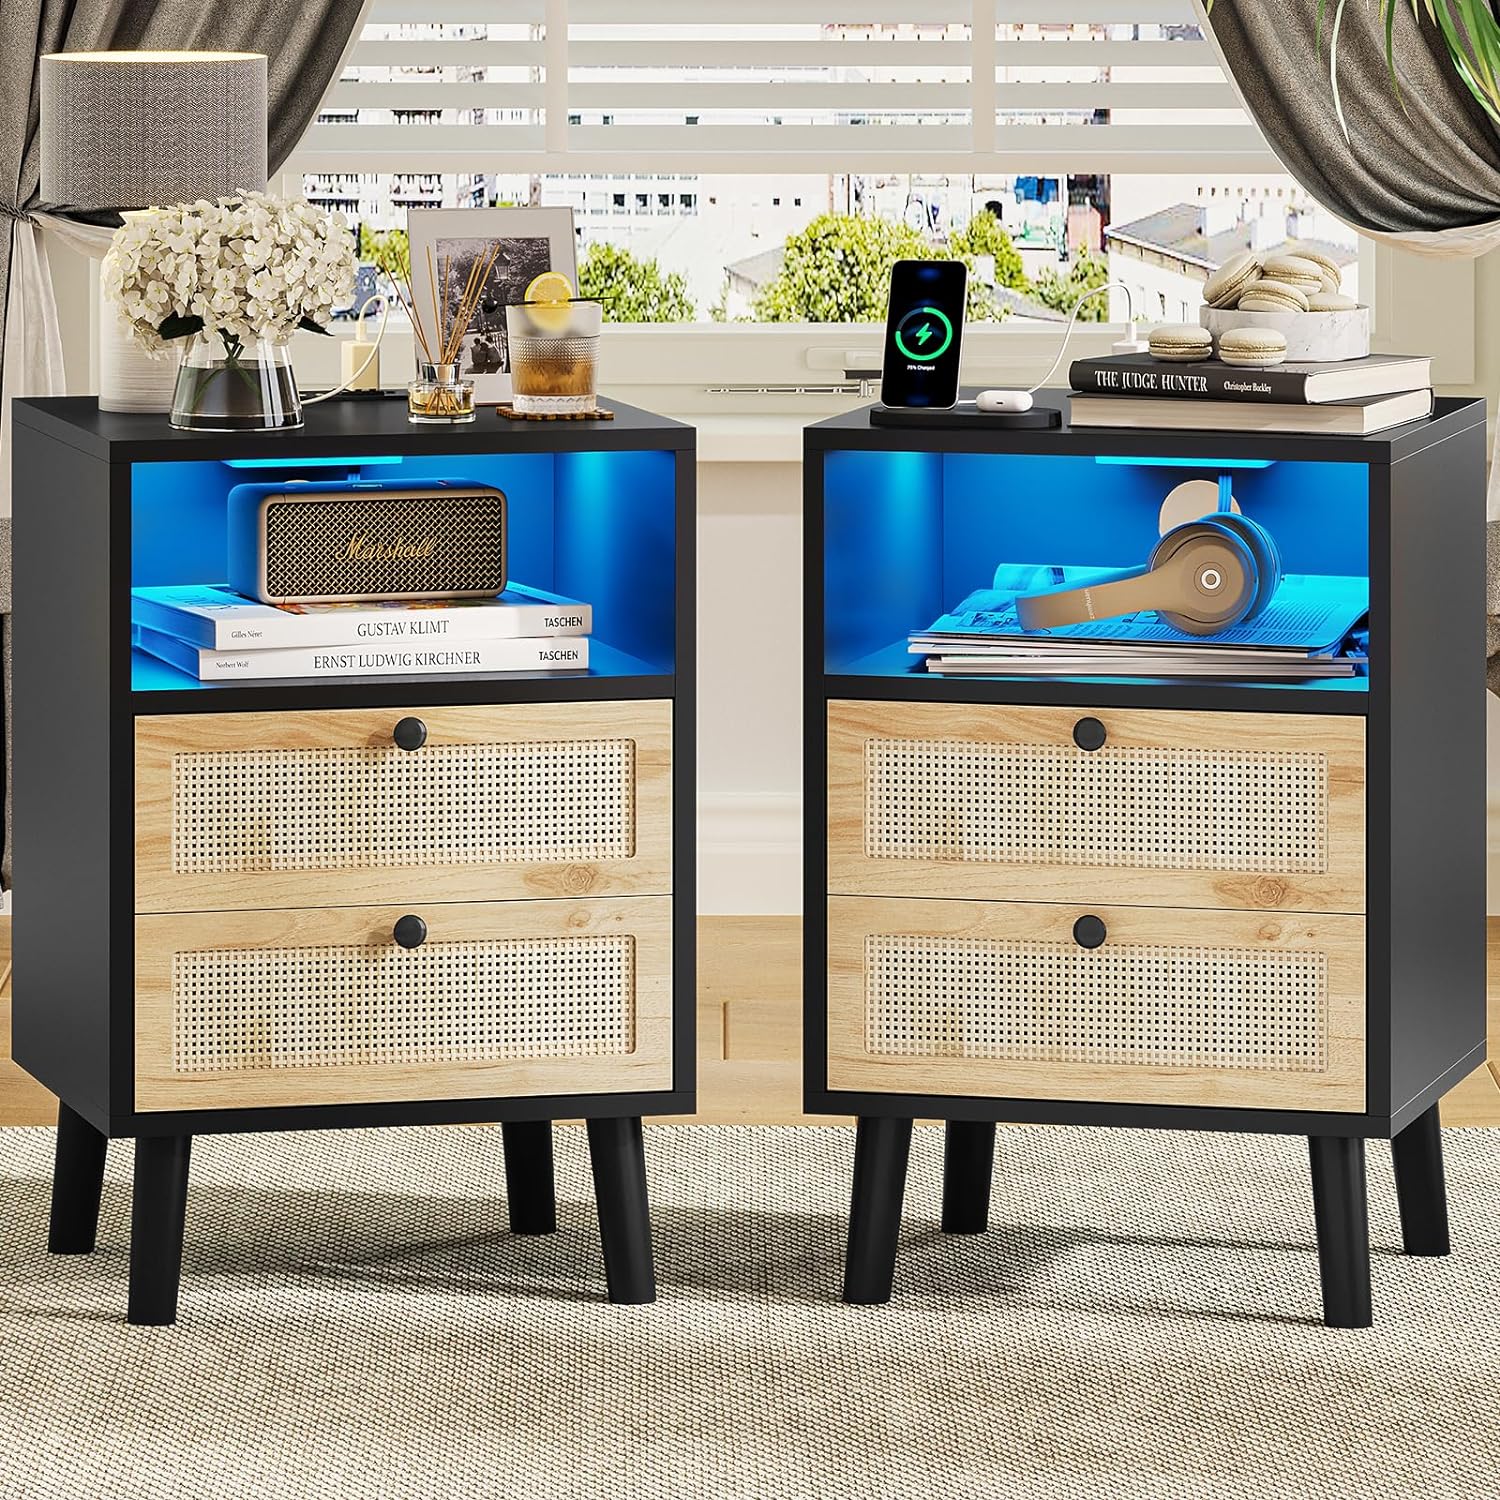 Boxes were heavy, nightstands are not heavy. The LED lights are a nice touch. They are cute small nightstands for a good price.